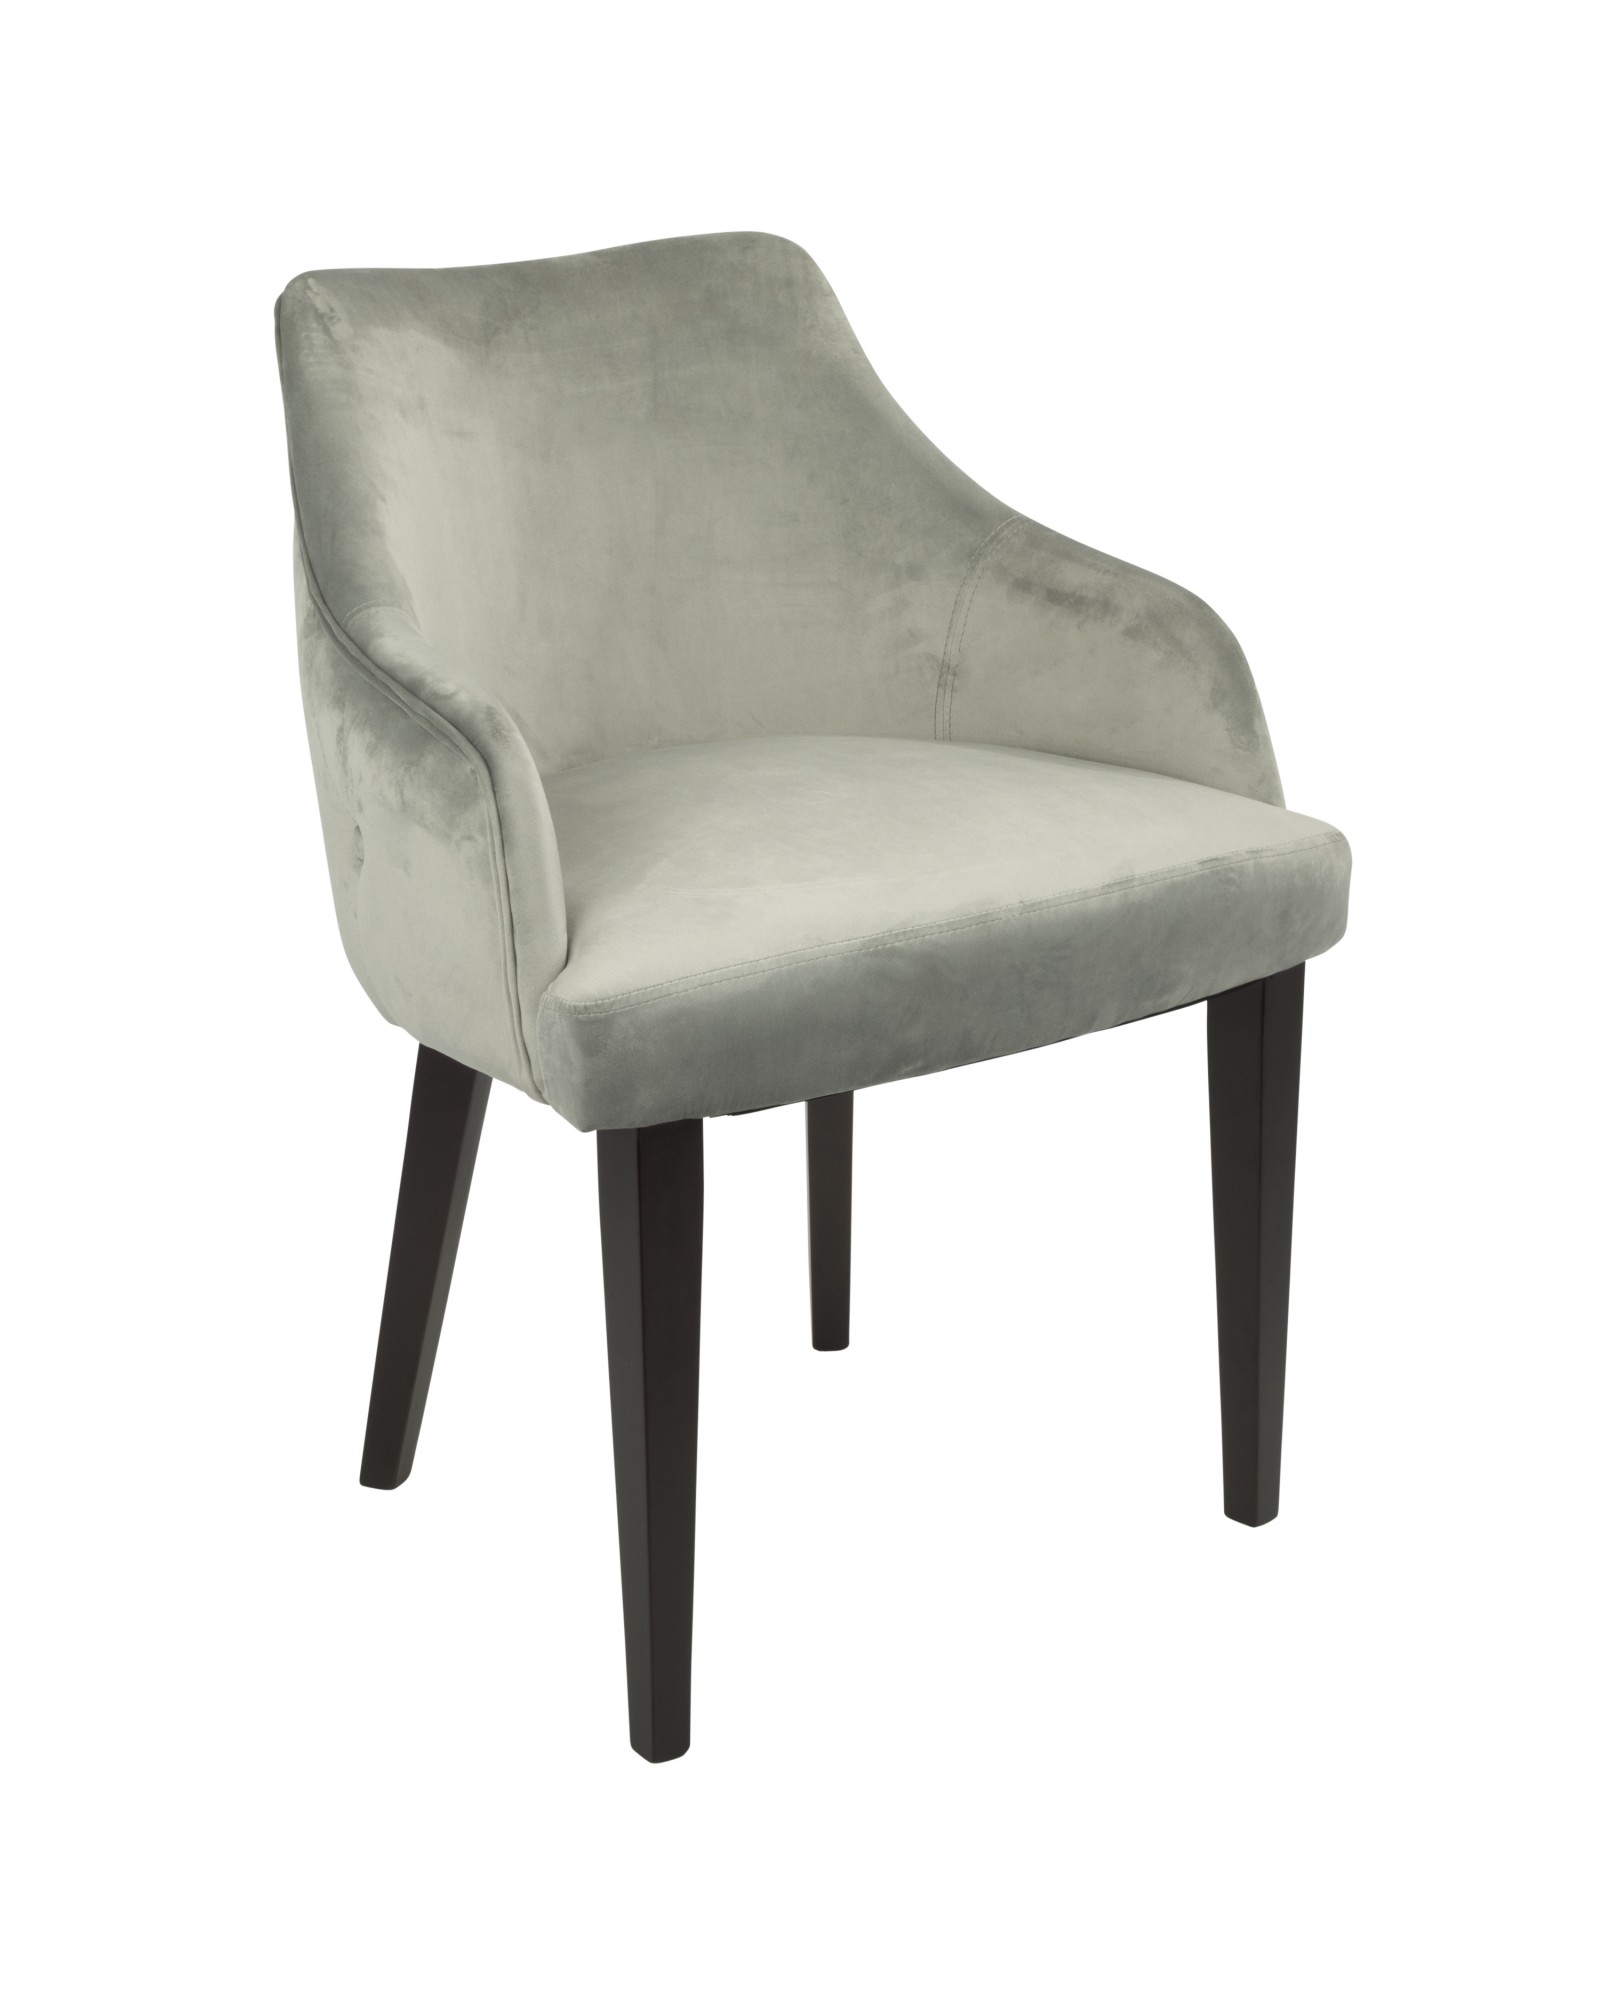 Eliza Contemporary Dining Chair in Espresso with Grey Velvet - Set of 2